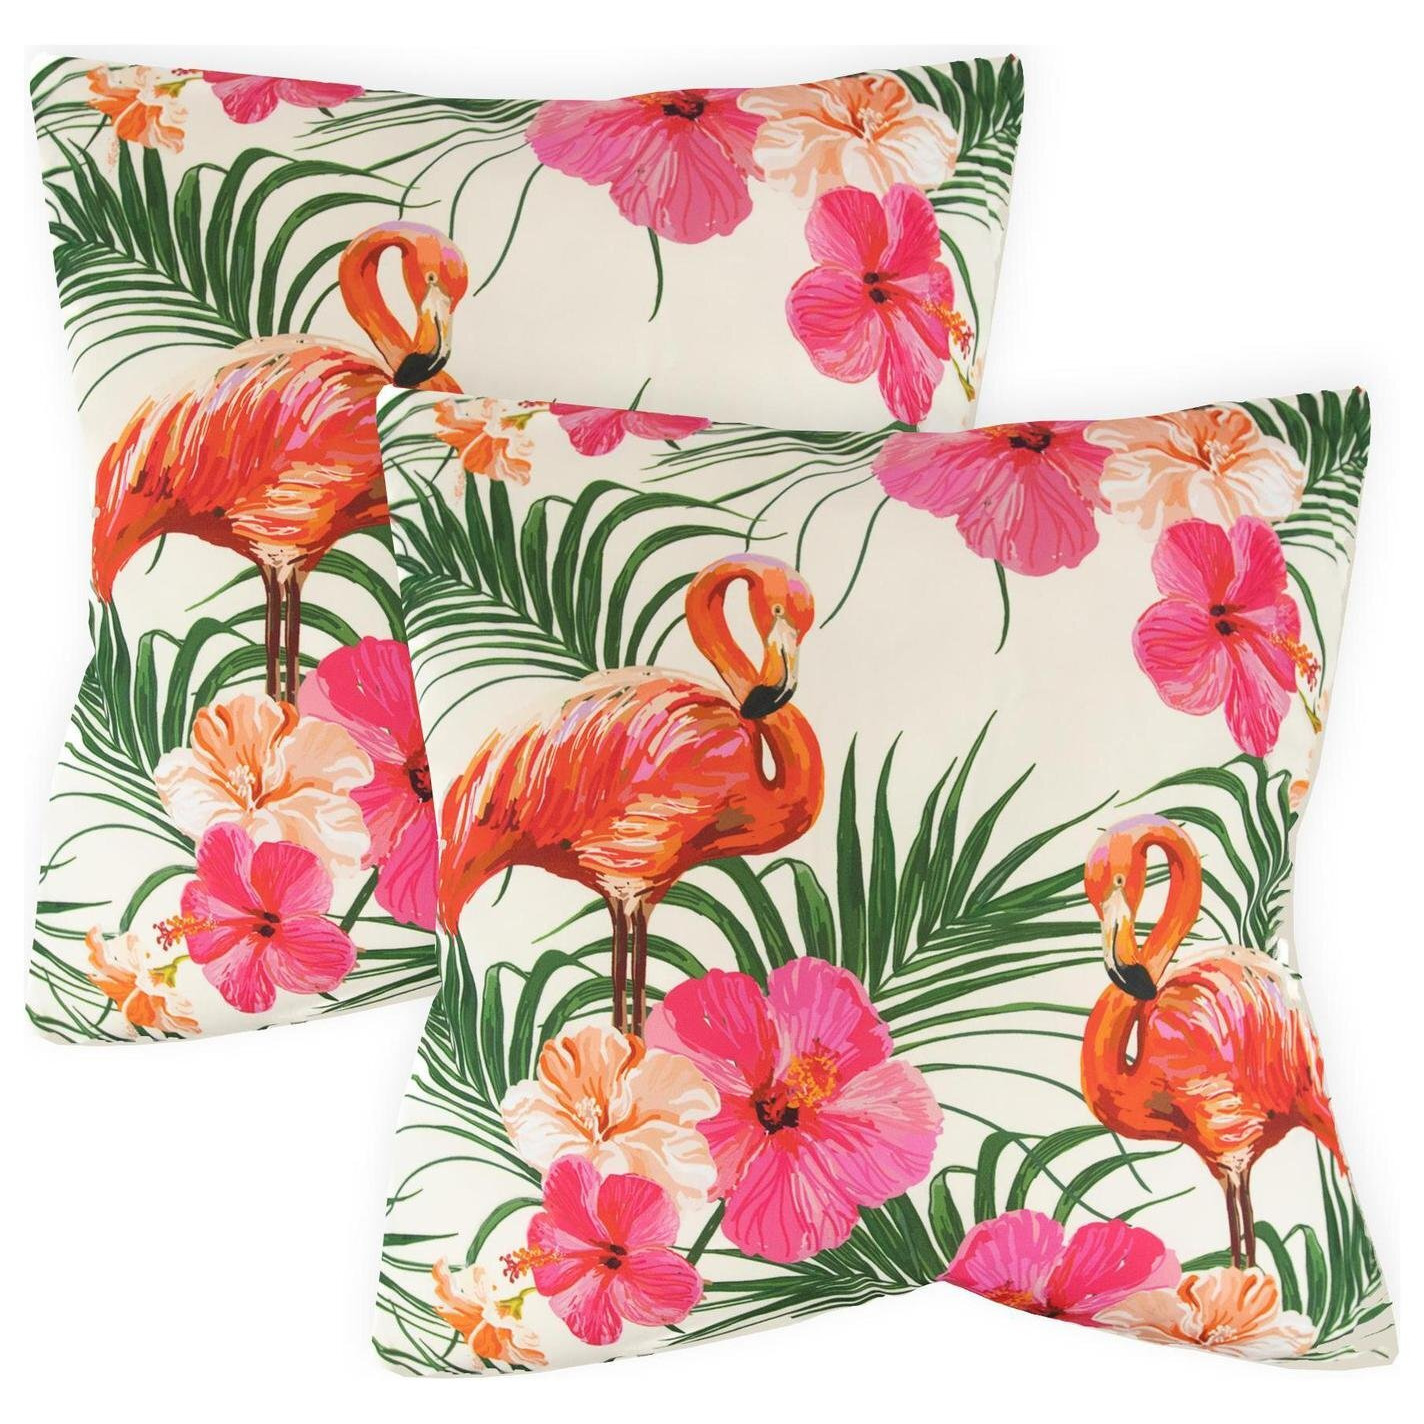 Streetwize Flamingo Print Outdoor Cushion - Pack of 4 - image 1